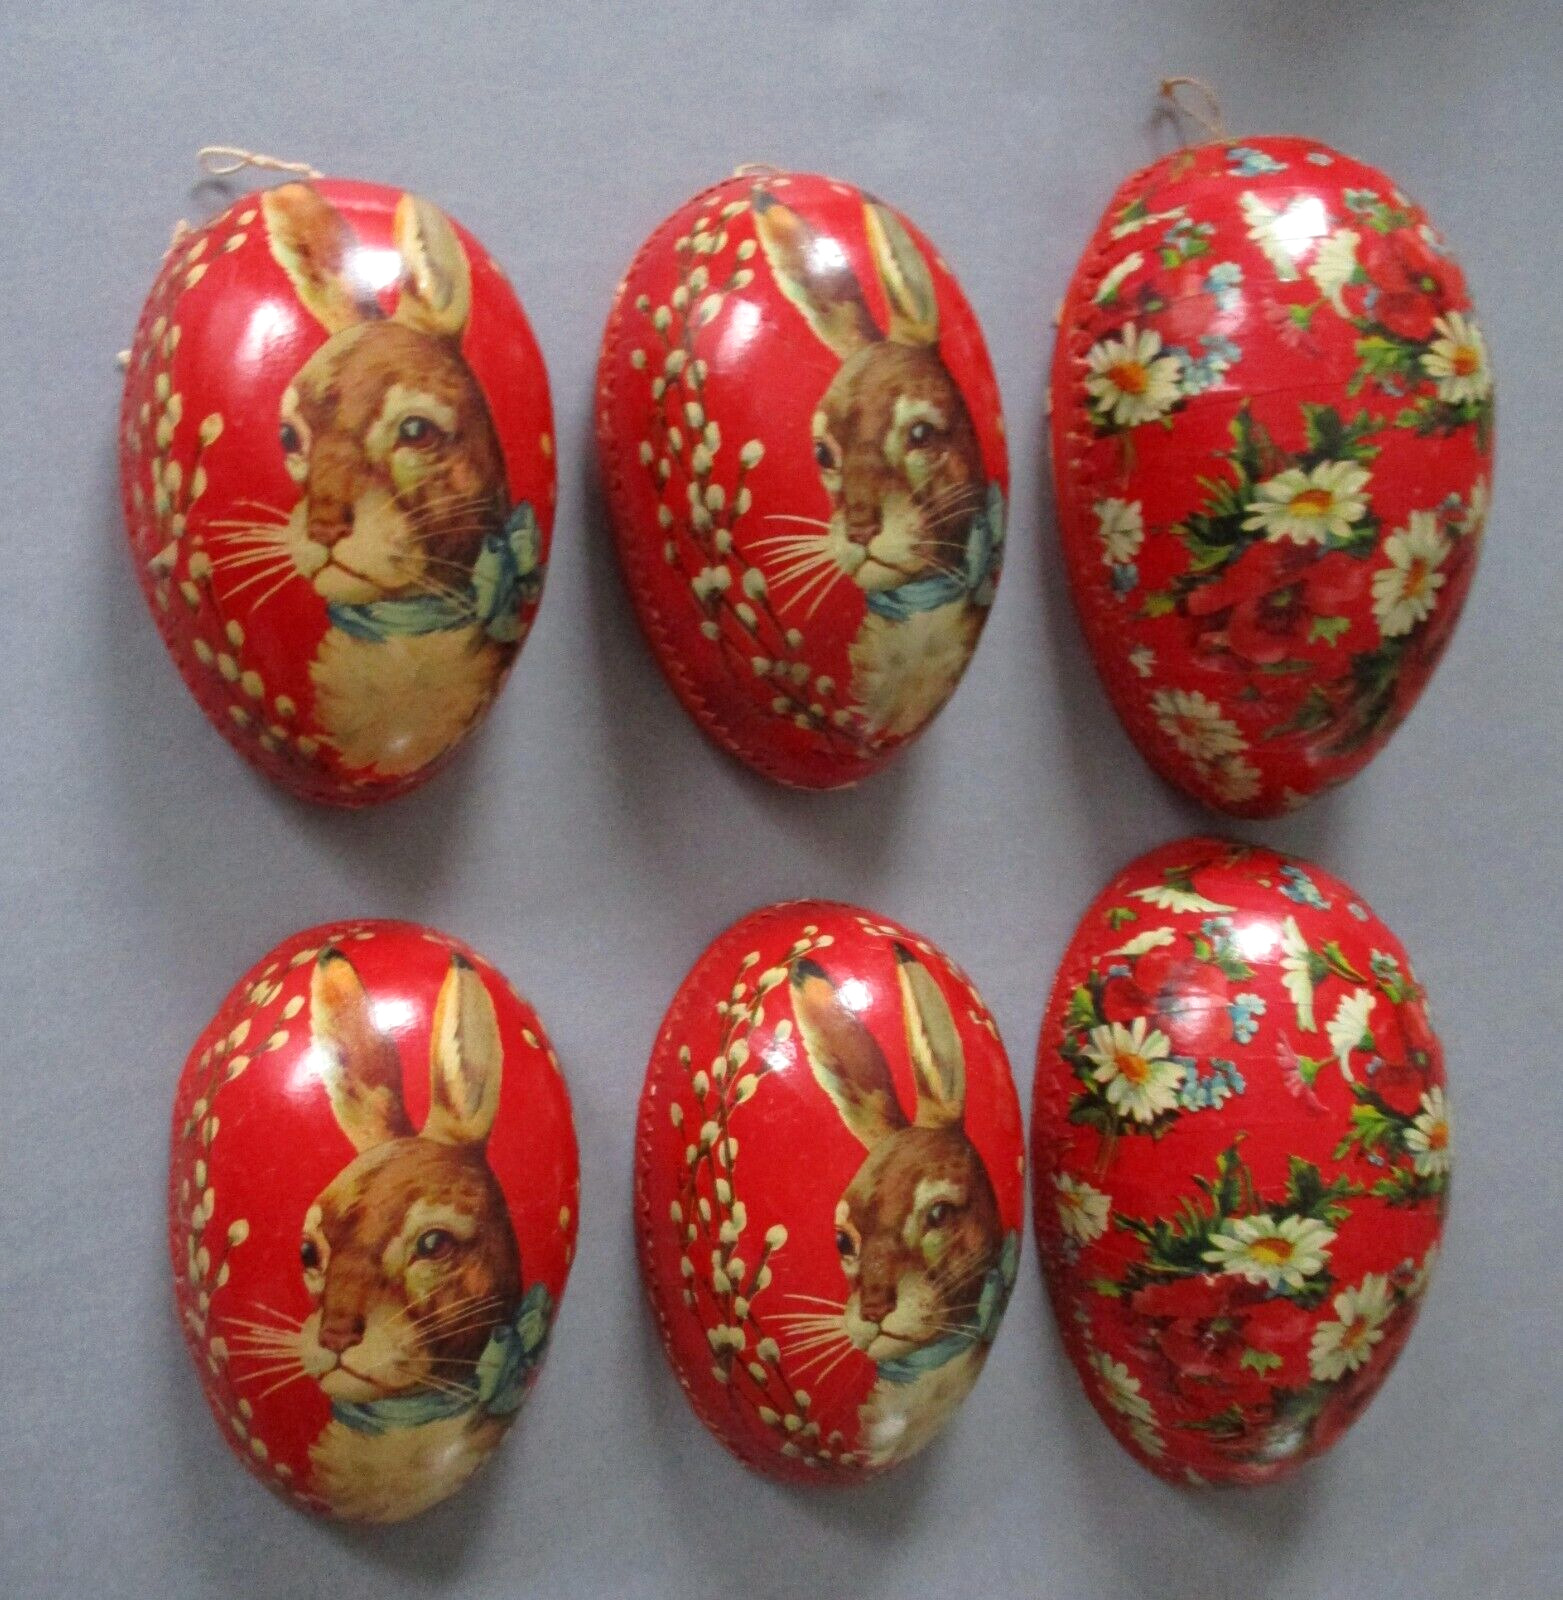 Antique Nesting Candy Container Eggs Set with Flowers & Rabbits ~ Germany